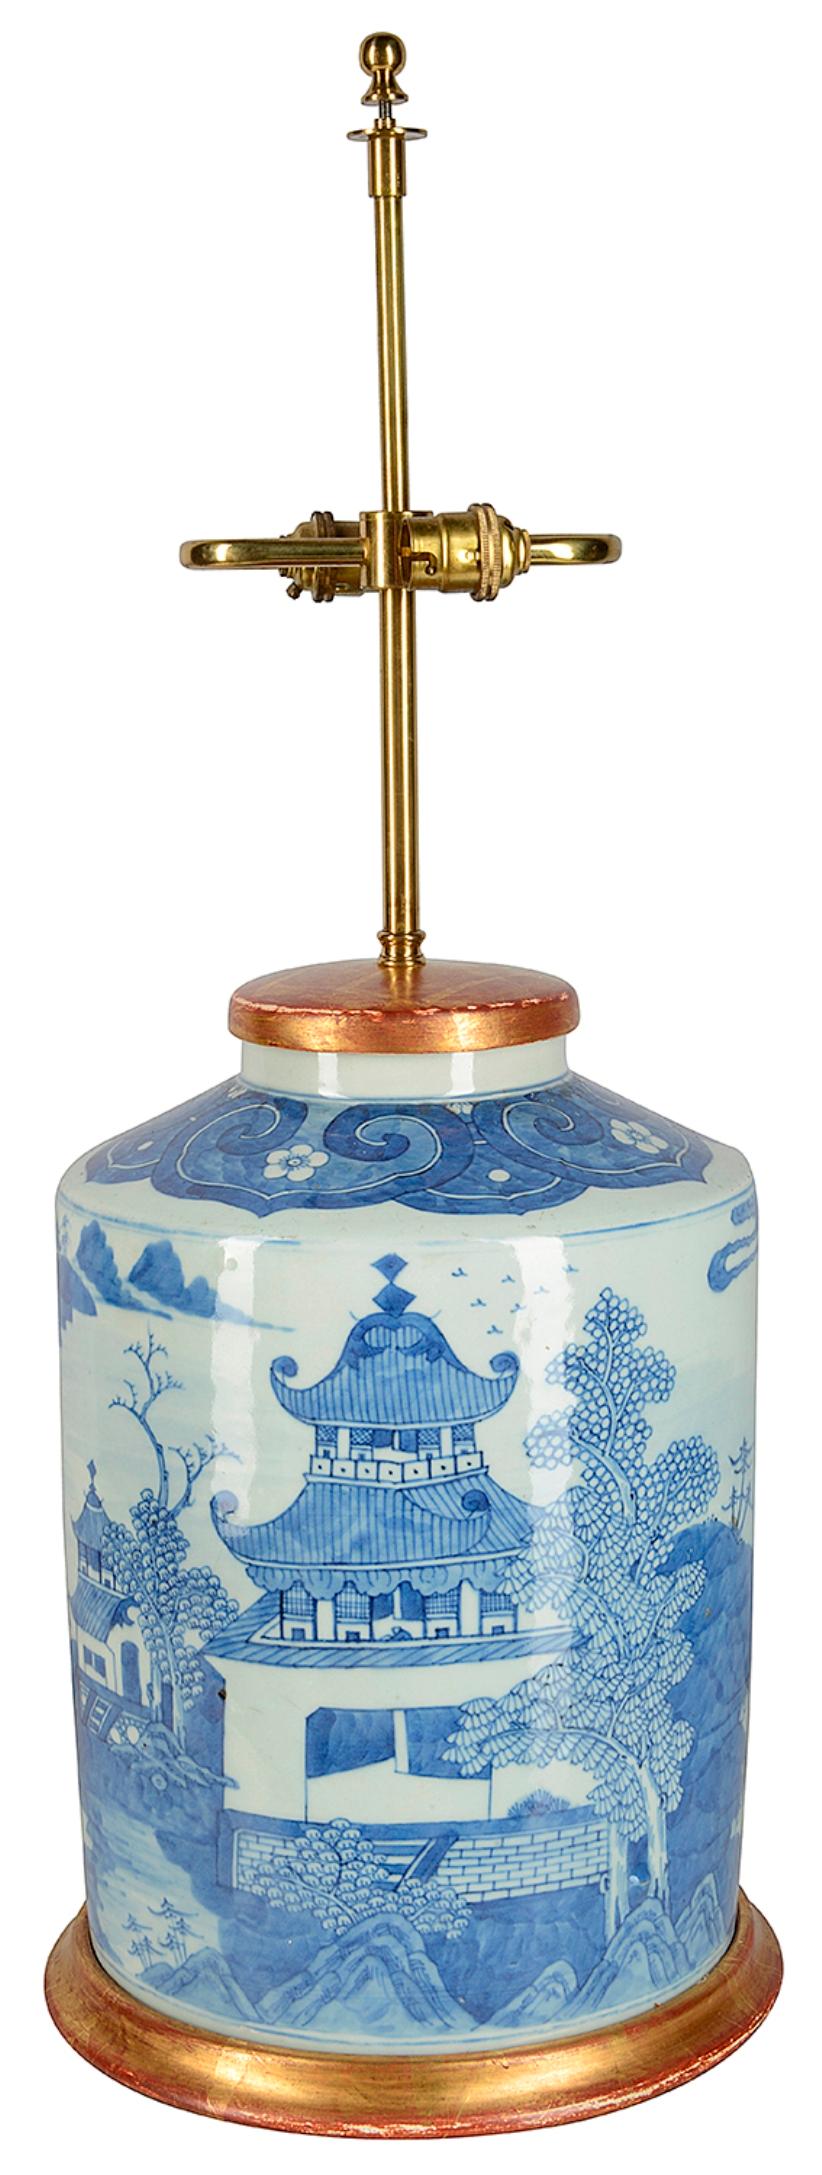 A very impressive late 19th century Chinese blue and white porcelain jar / lamp. Having classical pagoda buildings set into gardens and mountains behind. Mounted on a gilded base and lid.